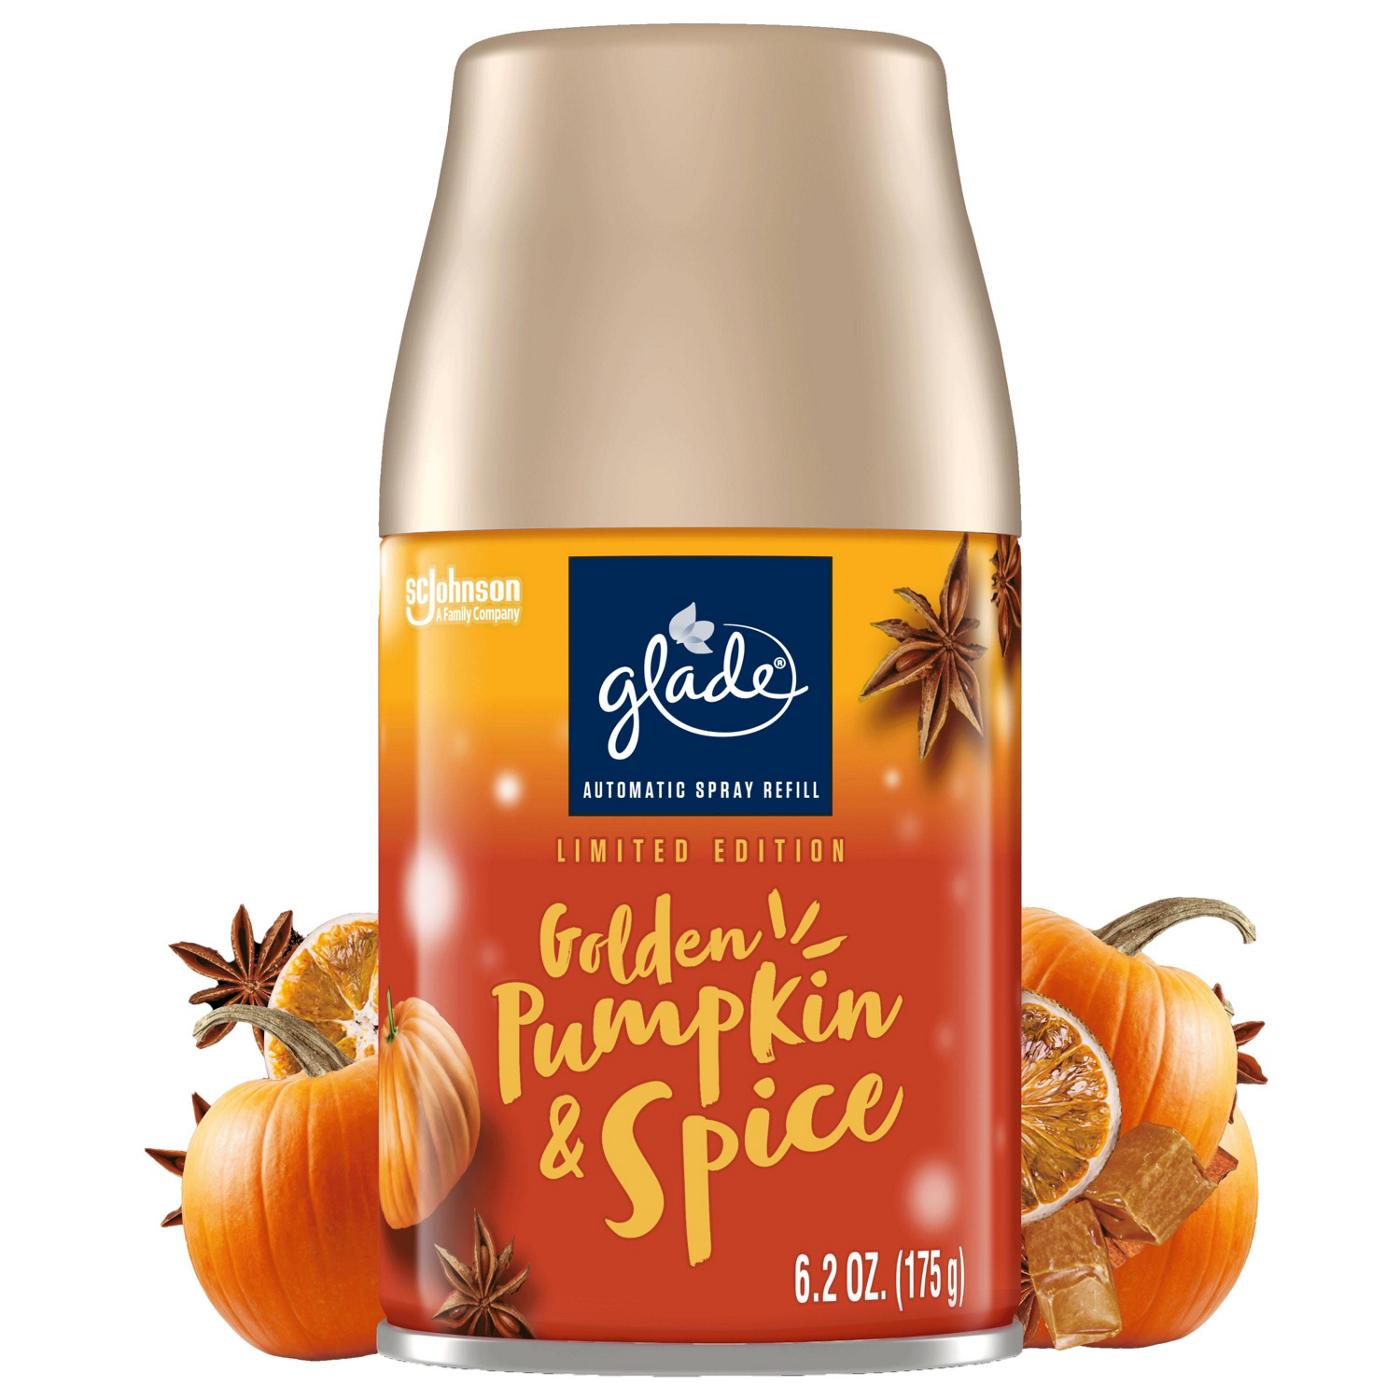 Glade Automatic Spray Refill - Golden Pumpkin & Spice; image 1 of 2